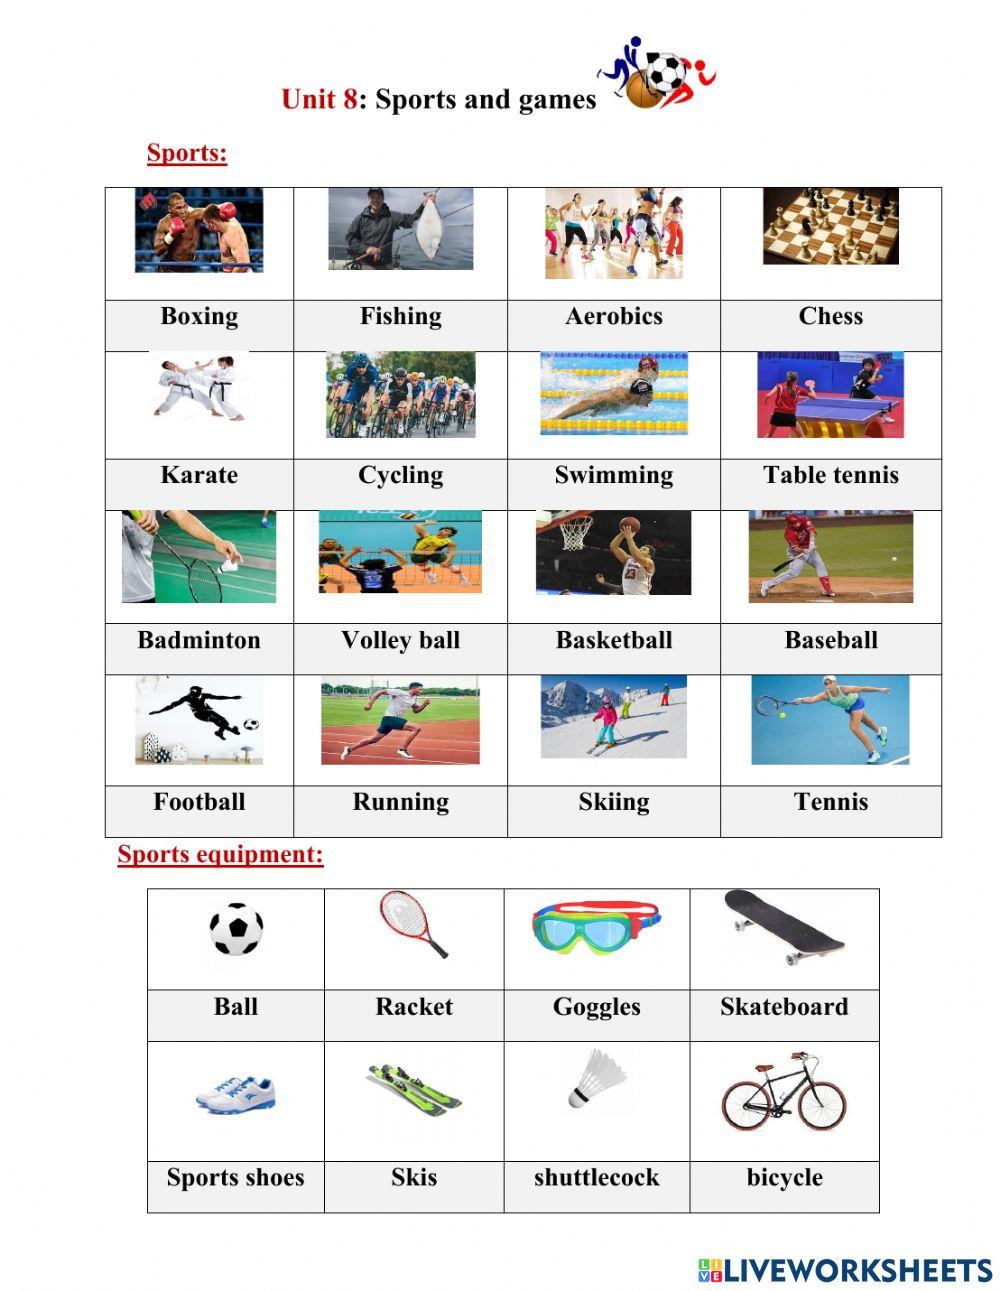 English 6 - vocab unit 8 sports and games